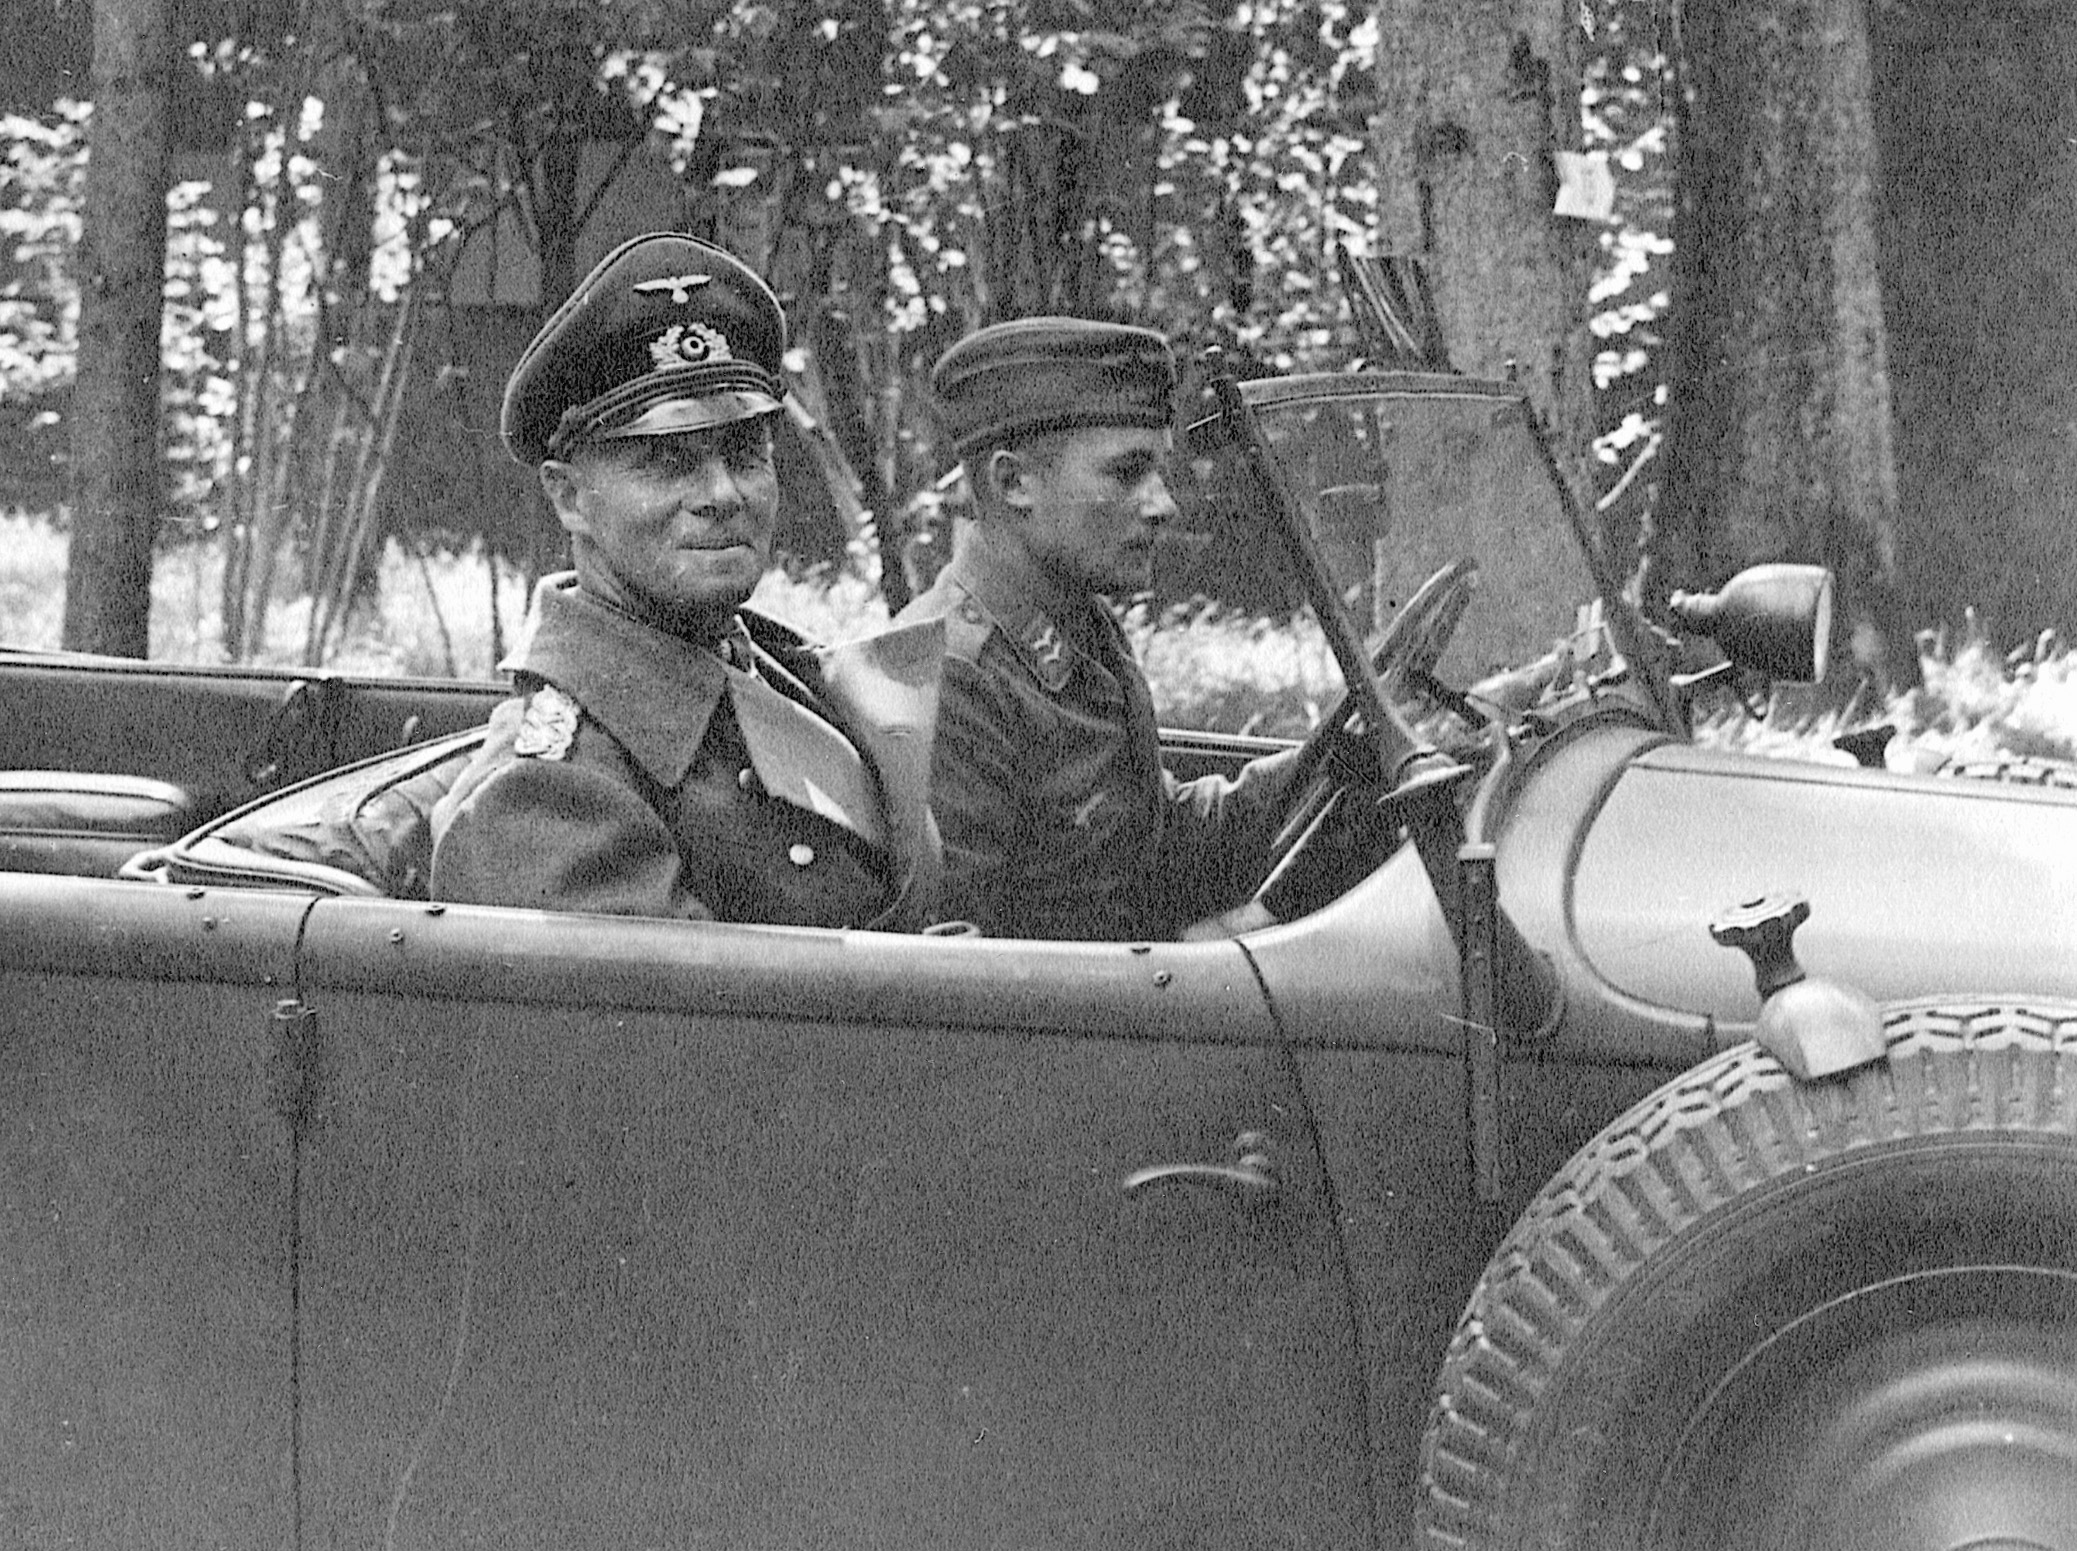 Feldmarschall Erwin Rommel commanded Army Group B covering both Calais and Normandy. He kept the Fifteenth Army in the Calais area even after the D-day landings. 